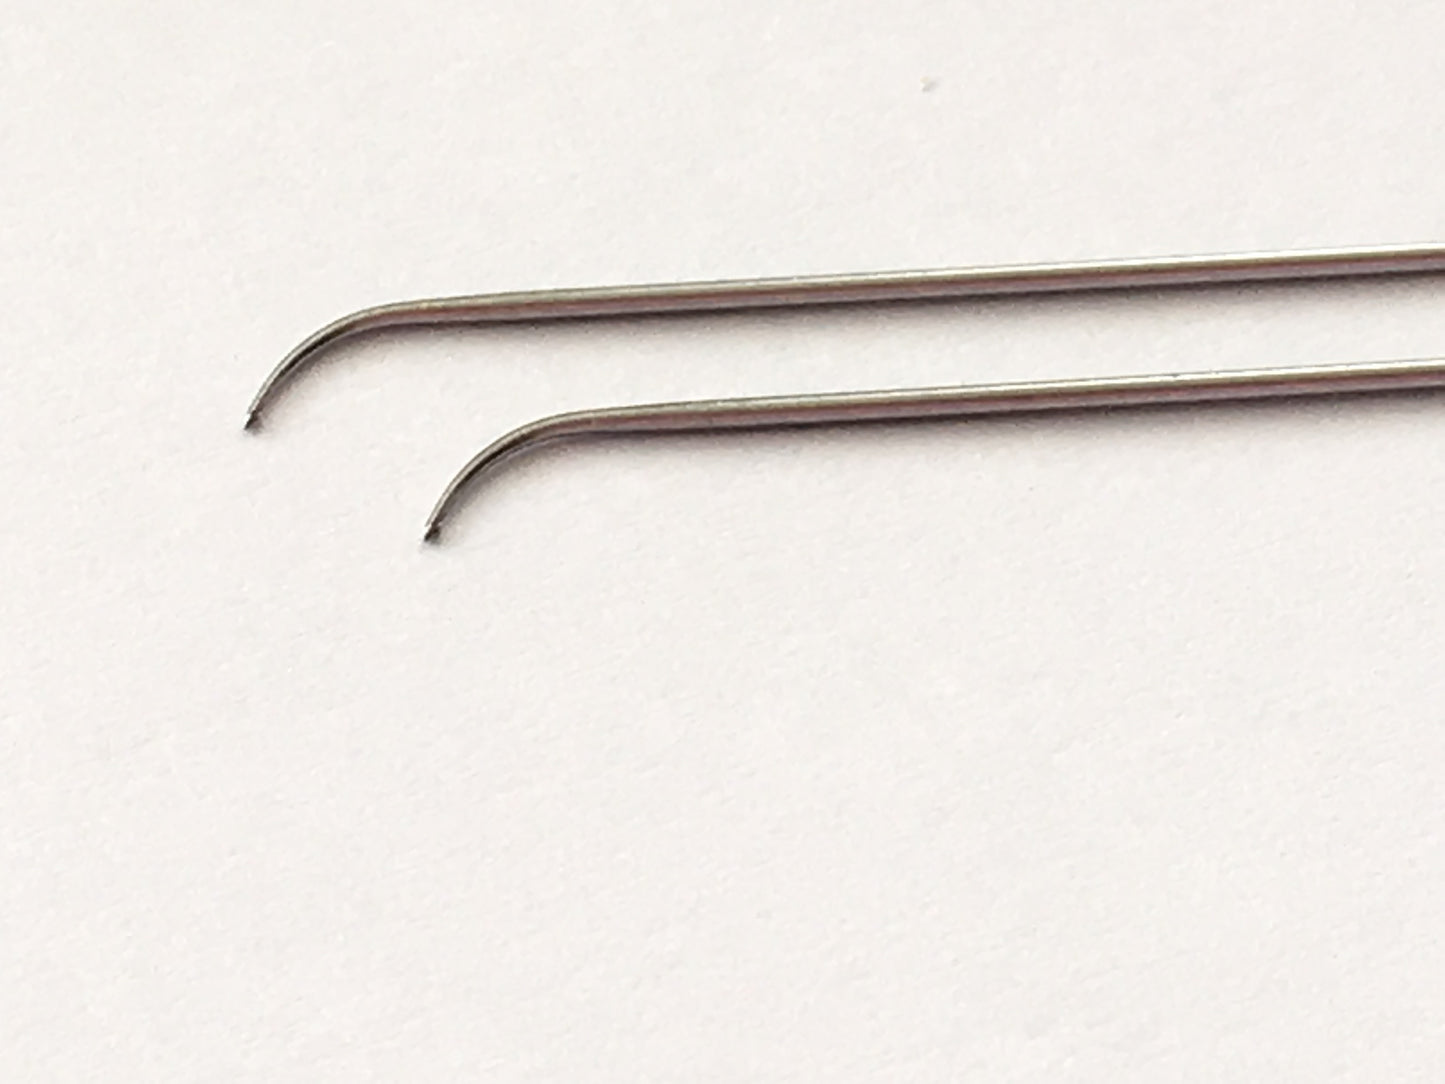 205  Curved German Type Knotting Hook/Ventilating Single Needles - 2 Sizes available